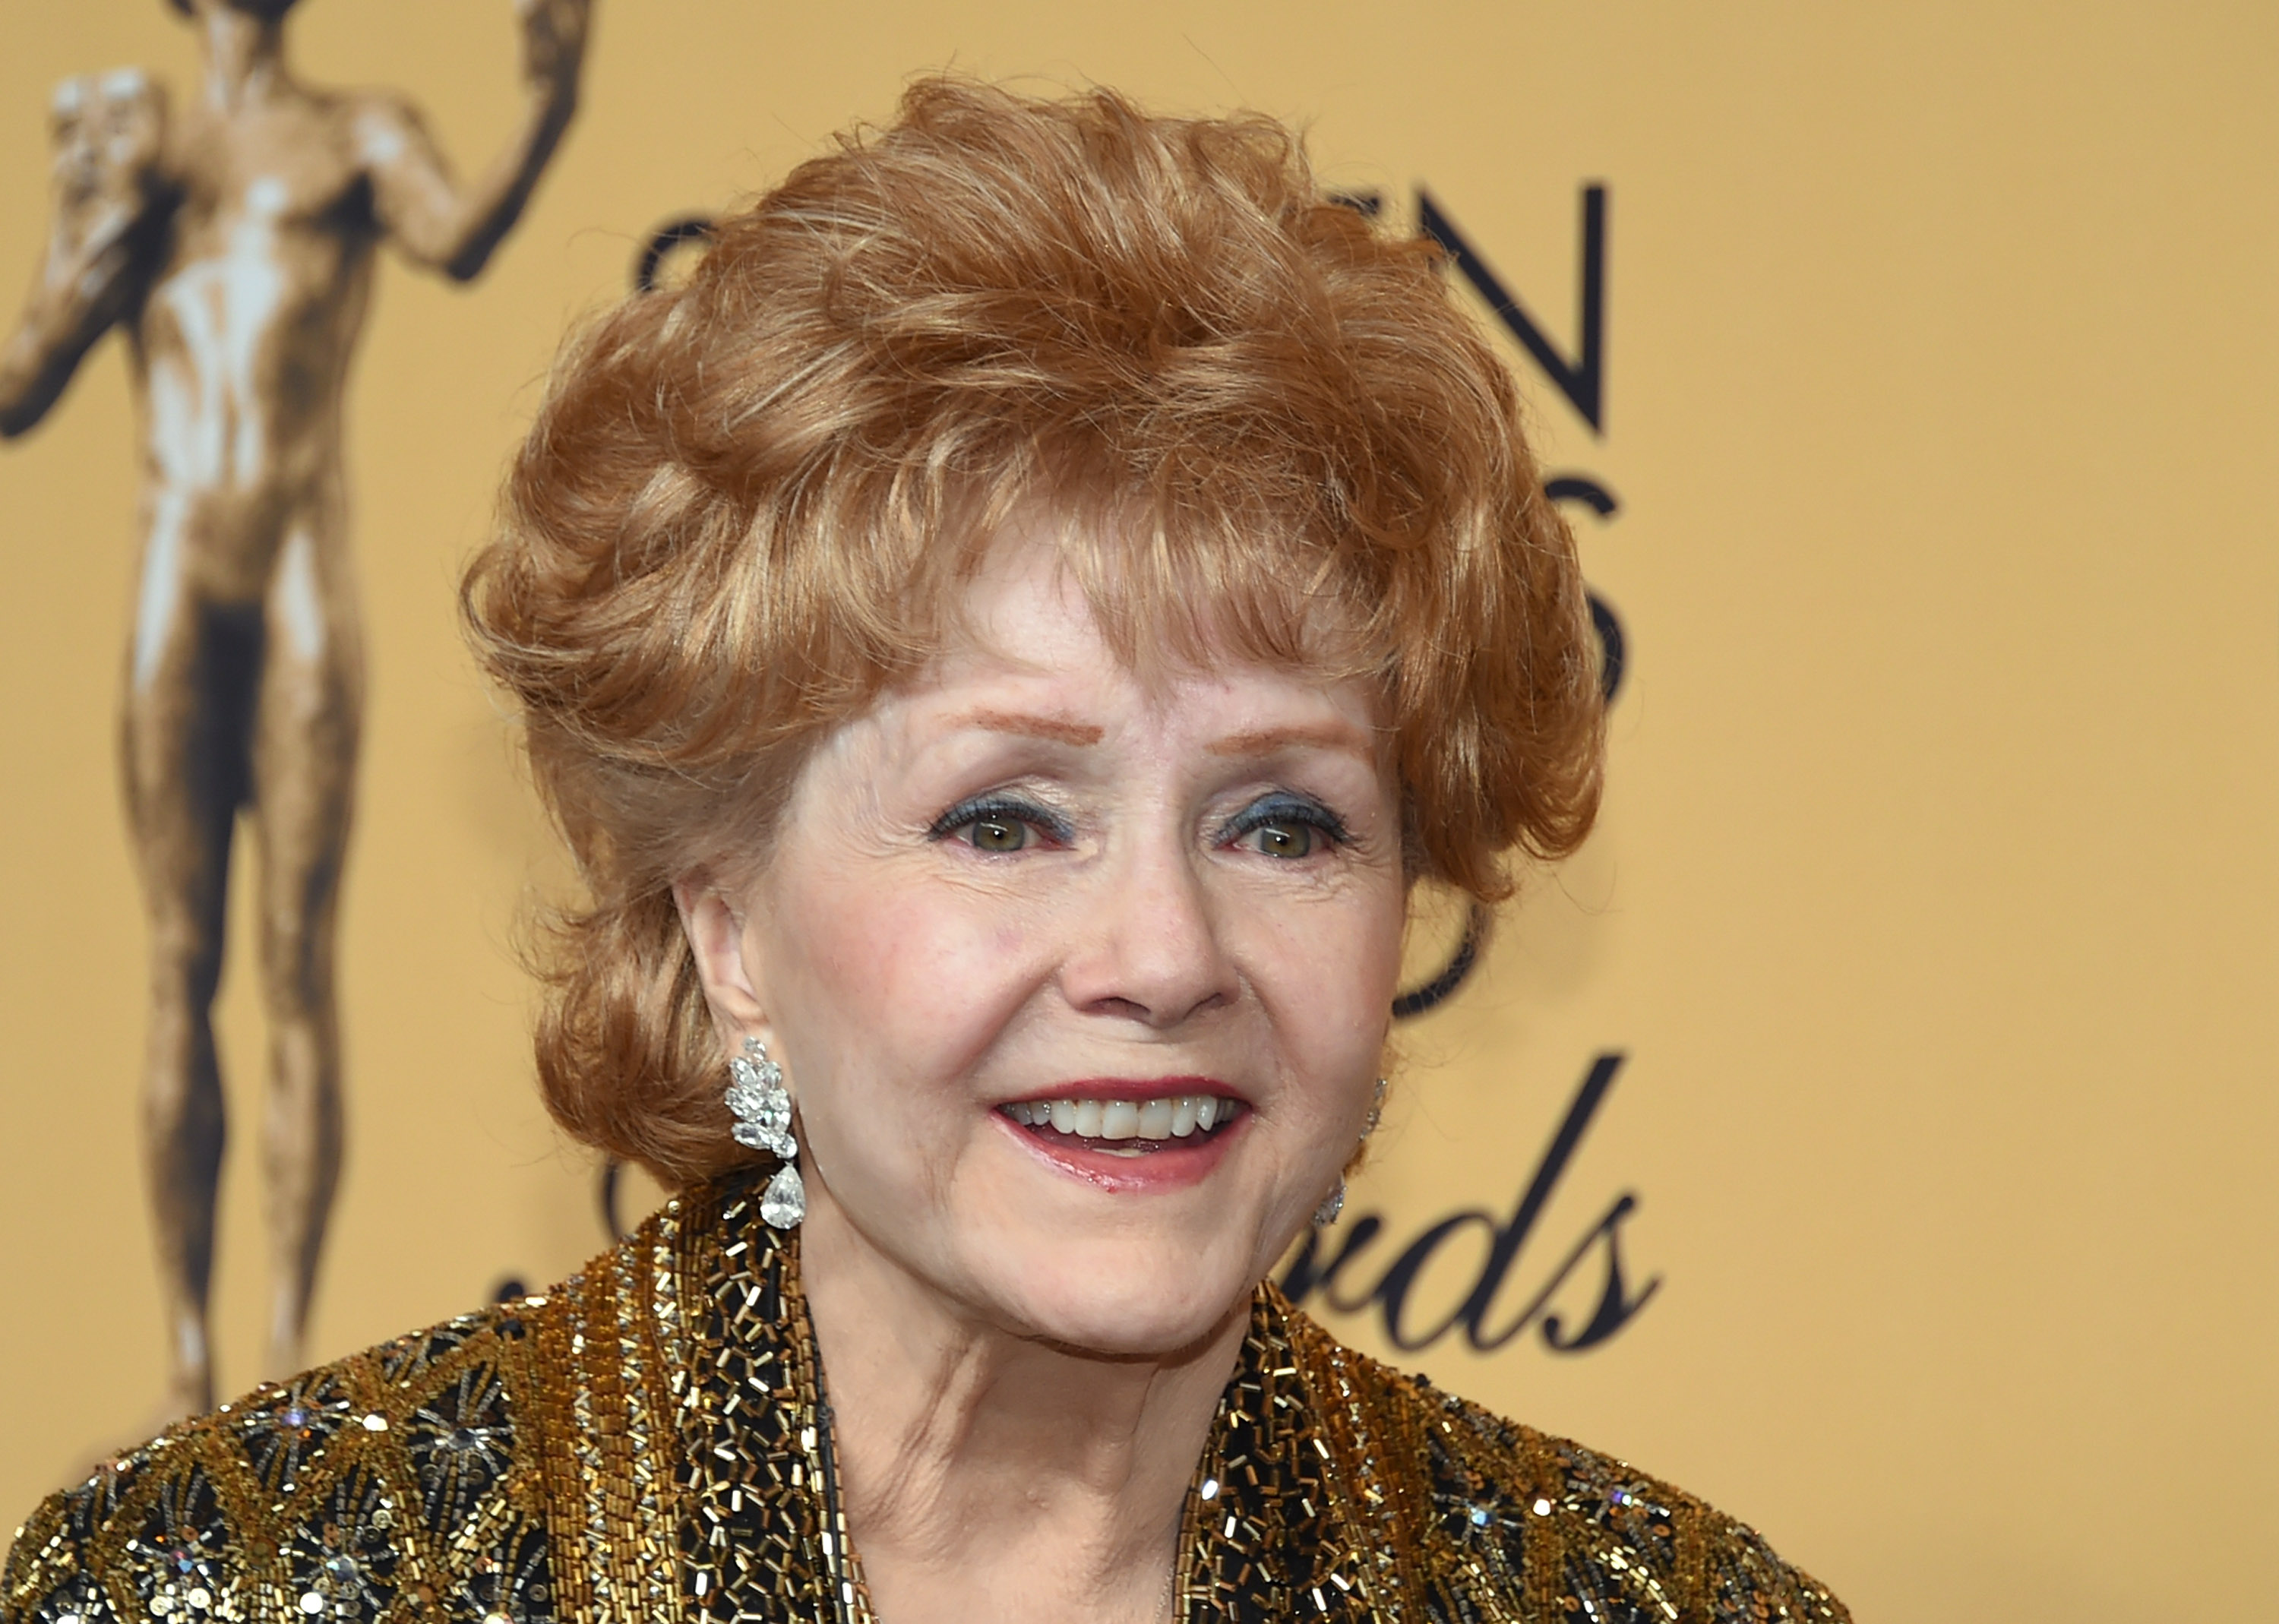 (FILES) This file photo taken on January 24, 2015 shows actress Debbie Reynolds, recipient of the Screen Actors Guild Life Achievement Award, posing in the press room during the 21st Annual Screen Actors Guild Awards at The Shrine Auditorium in Los Angeles, California. Film legend Debbie Reynolds was rushed to hospital on December 28, 2016 after suffering a possible stroke, a day after the death of her movie star daughter Carrie Fisher, emergency services and US media said. / AFP PHOTO / GETTY IMAGES NORTH AMERICA / Ethan Miller